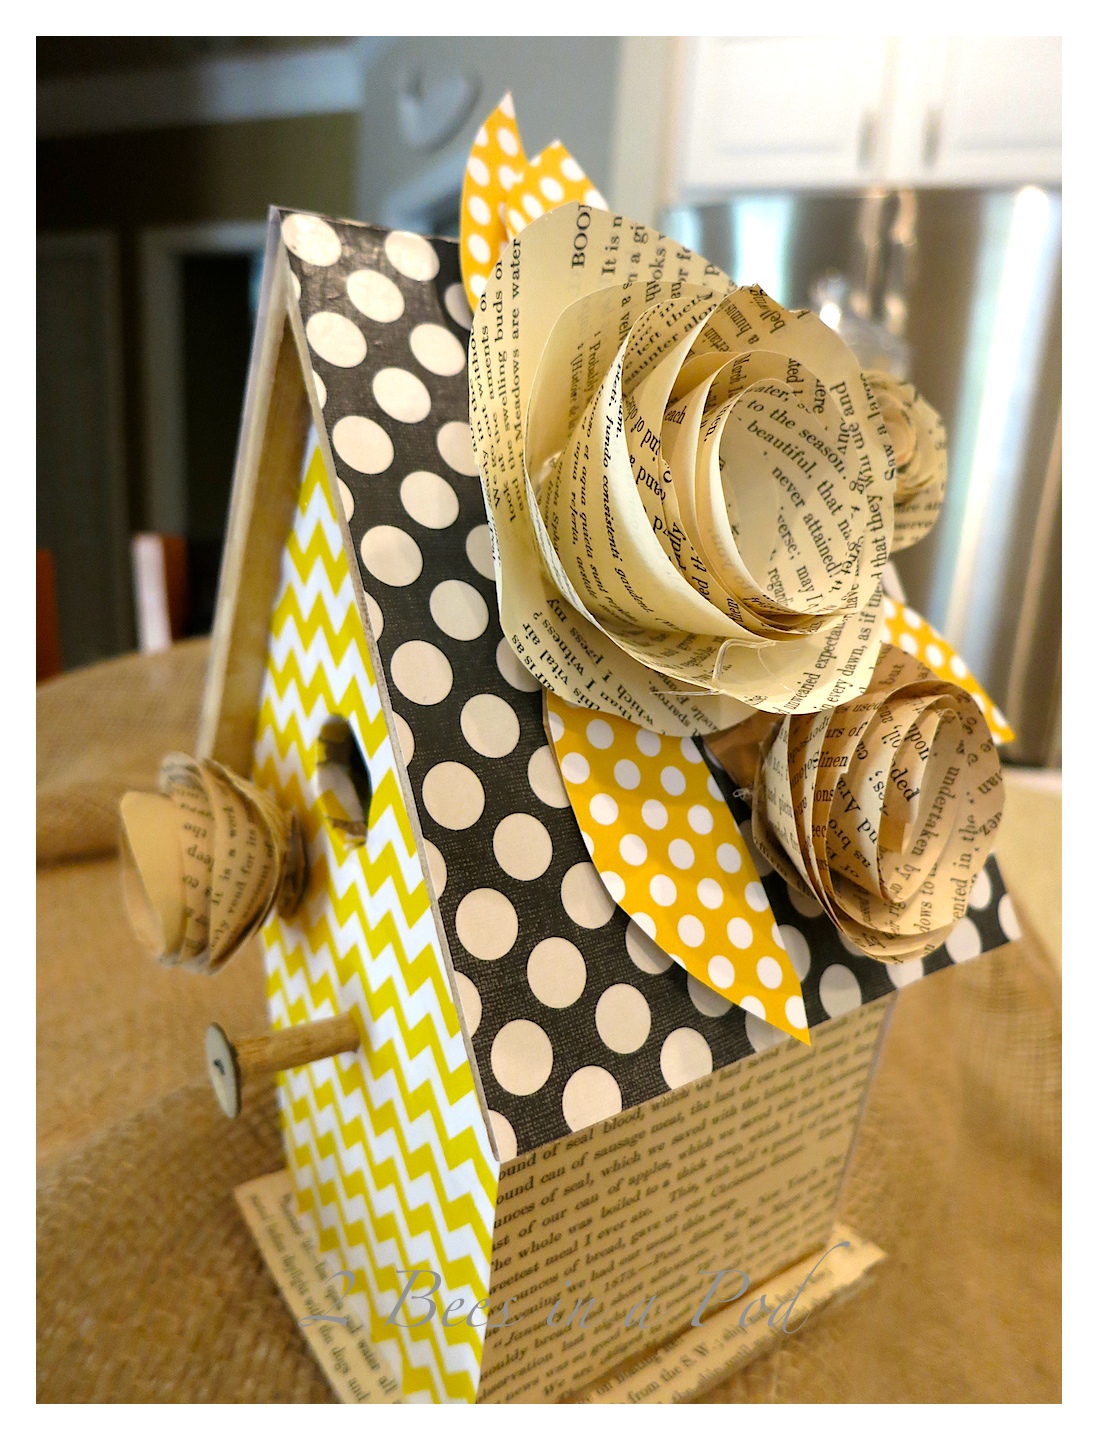 Create a decorative birdhouse. we usedd Mod Podge. scrapbook paper, antique book pages and a pre made birdhouse. For added decoration we made flowers from the antique book pages.